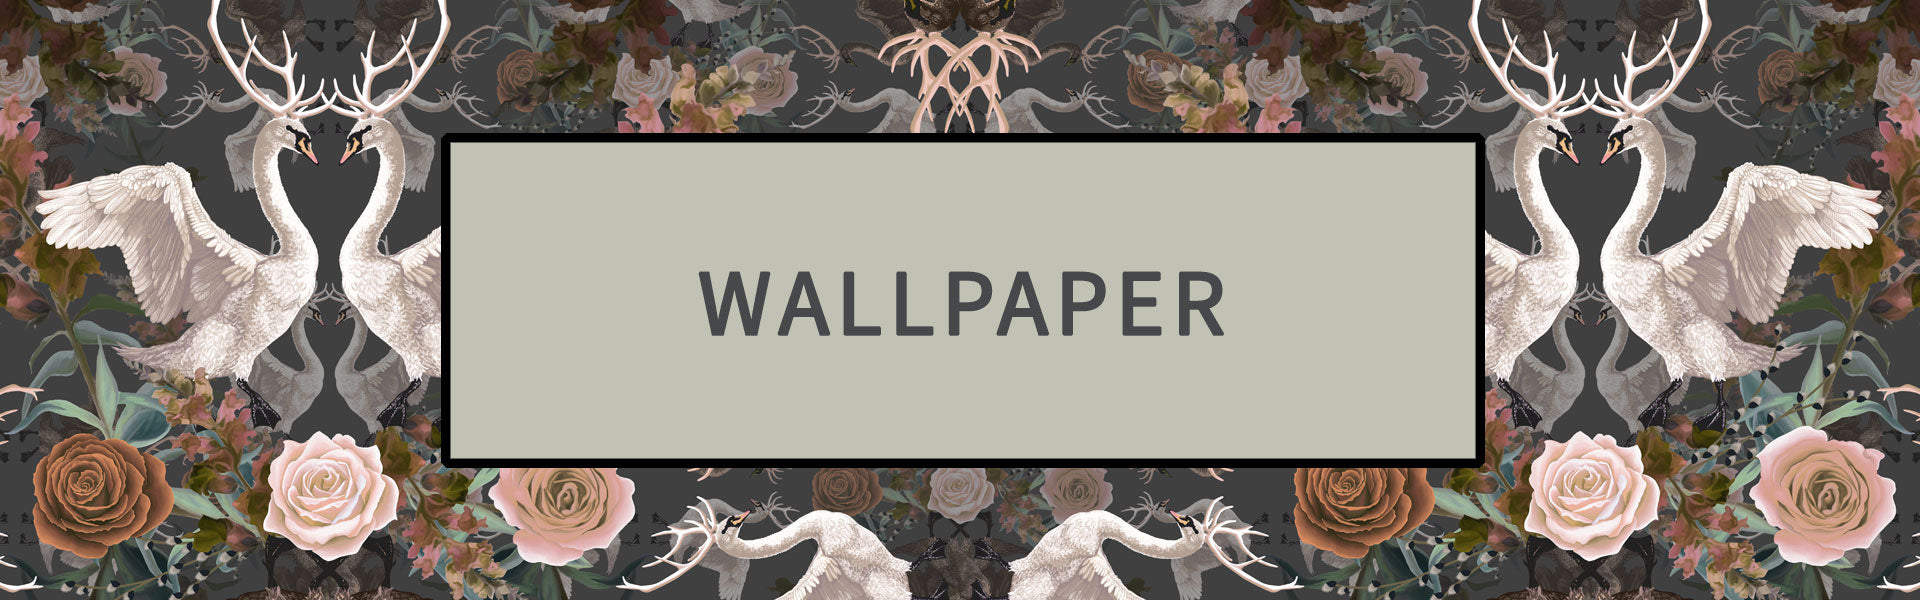 Patterned Designer Wallpaper from Becca Who